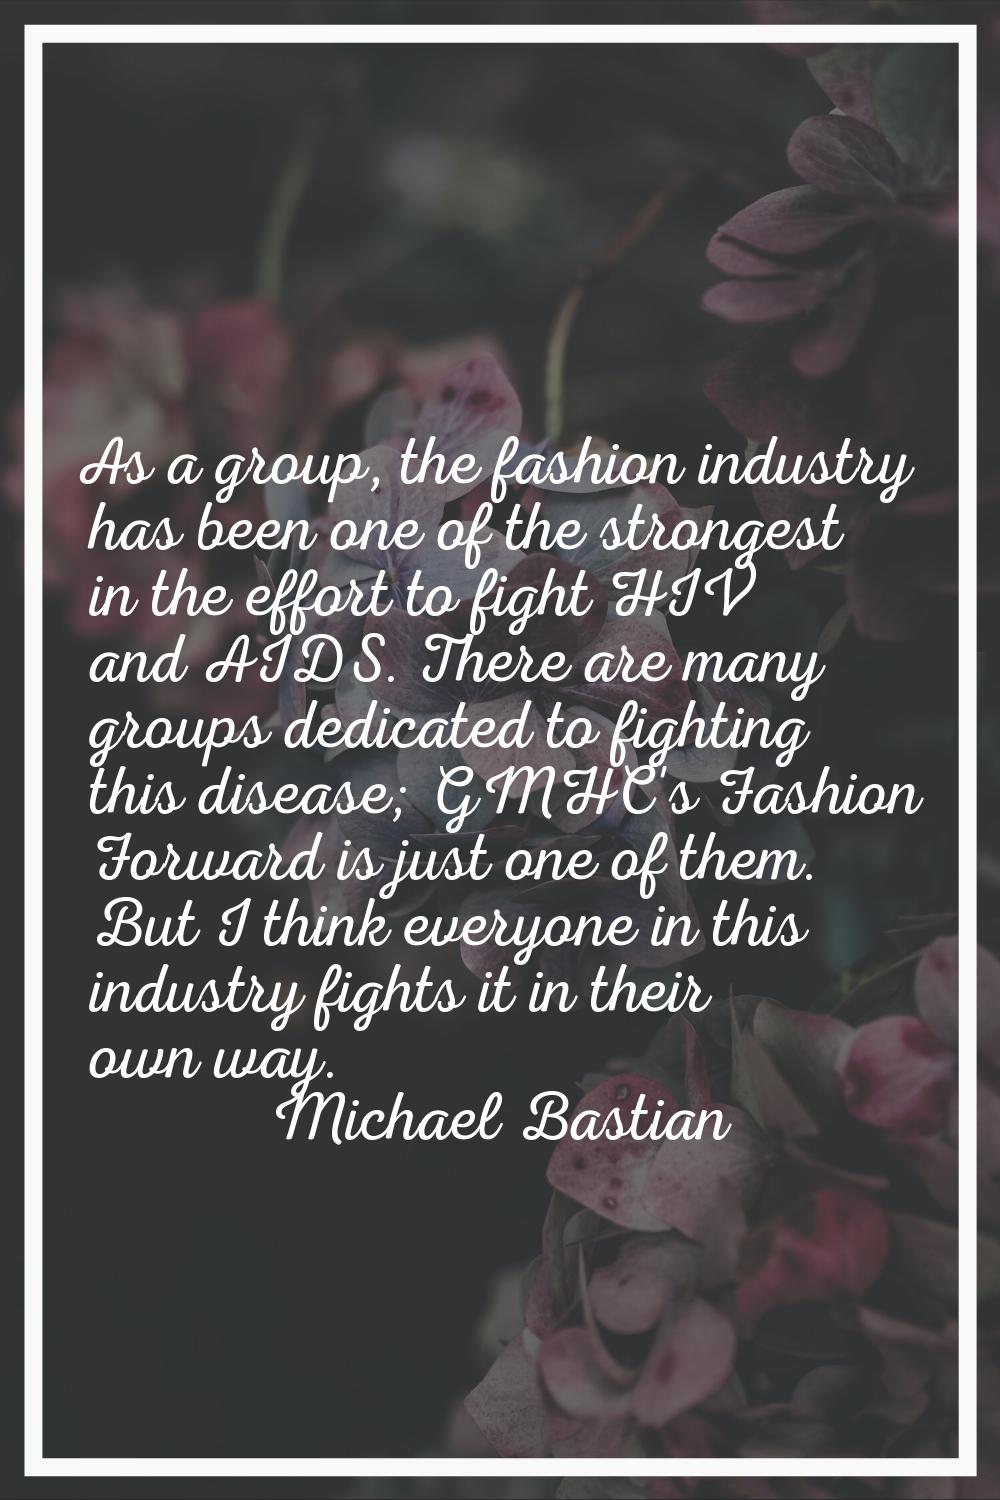 As a group, the fashion industry has been one of the strongest in the effort to fight HIV and AIDS.